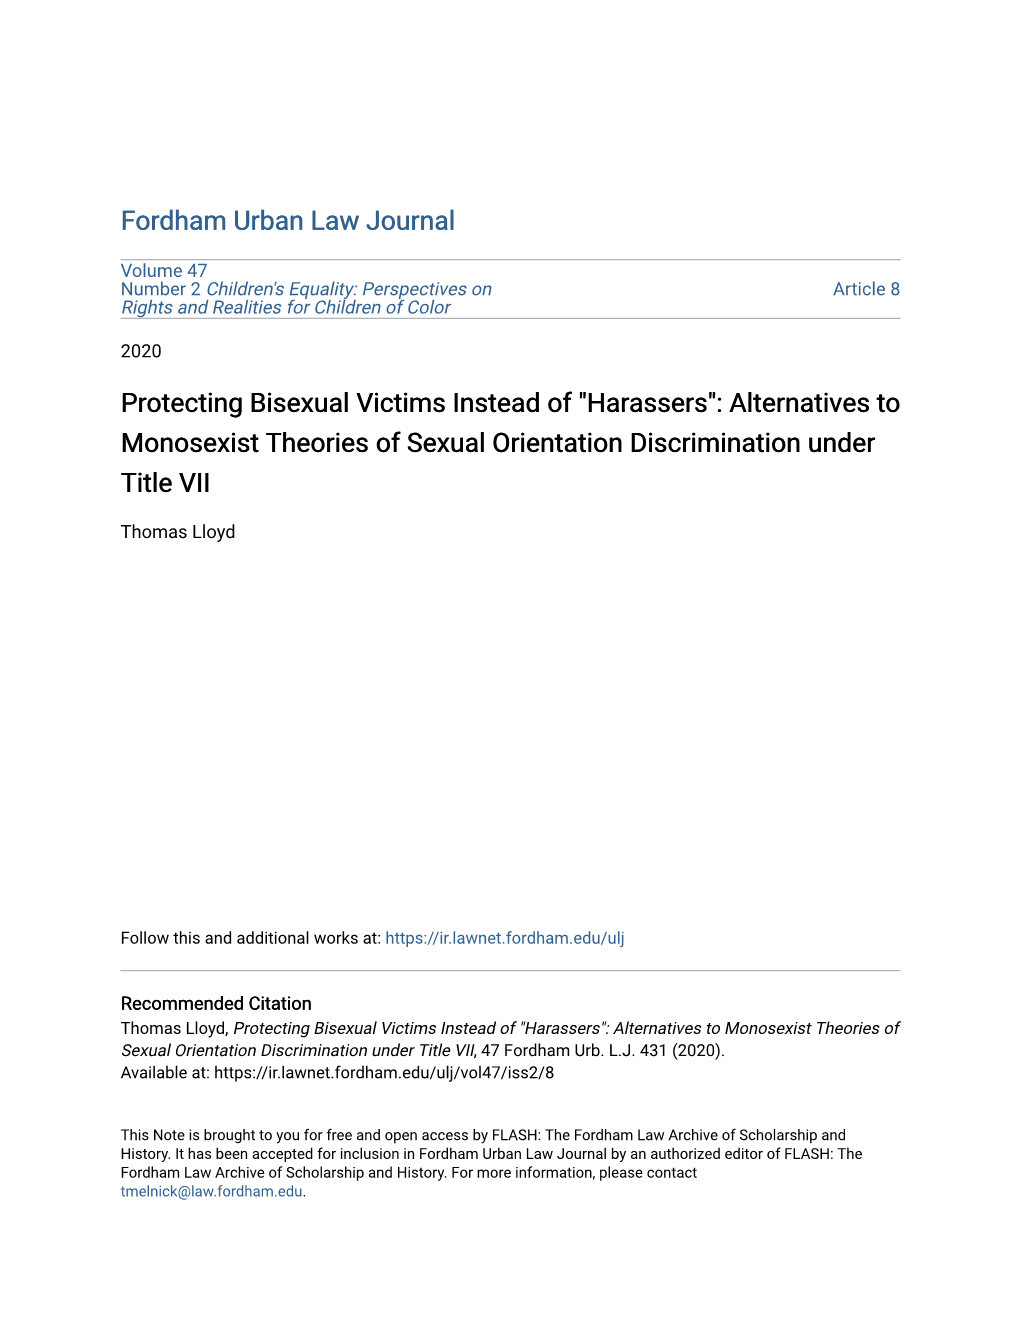 Protecting Bisexual Victims Instead of "Harassers": Alternatives to Monosexist Theories of Sexual Orientation Discrimination Under Title VII